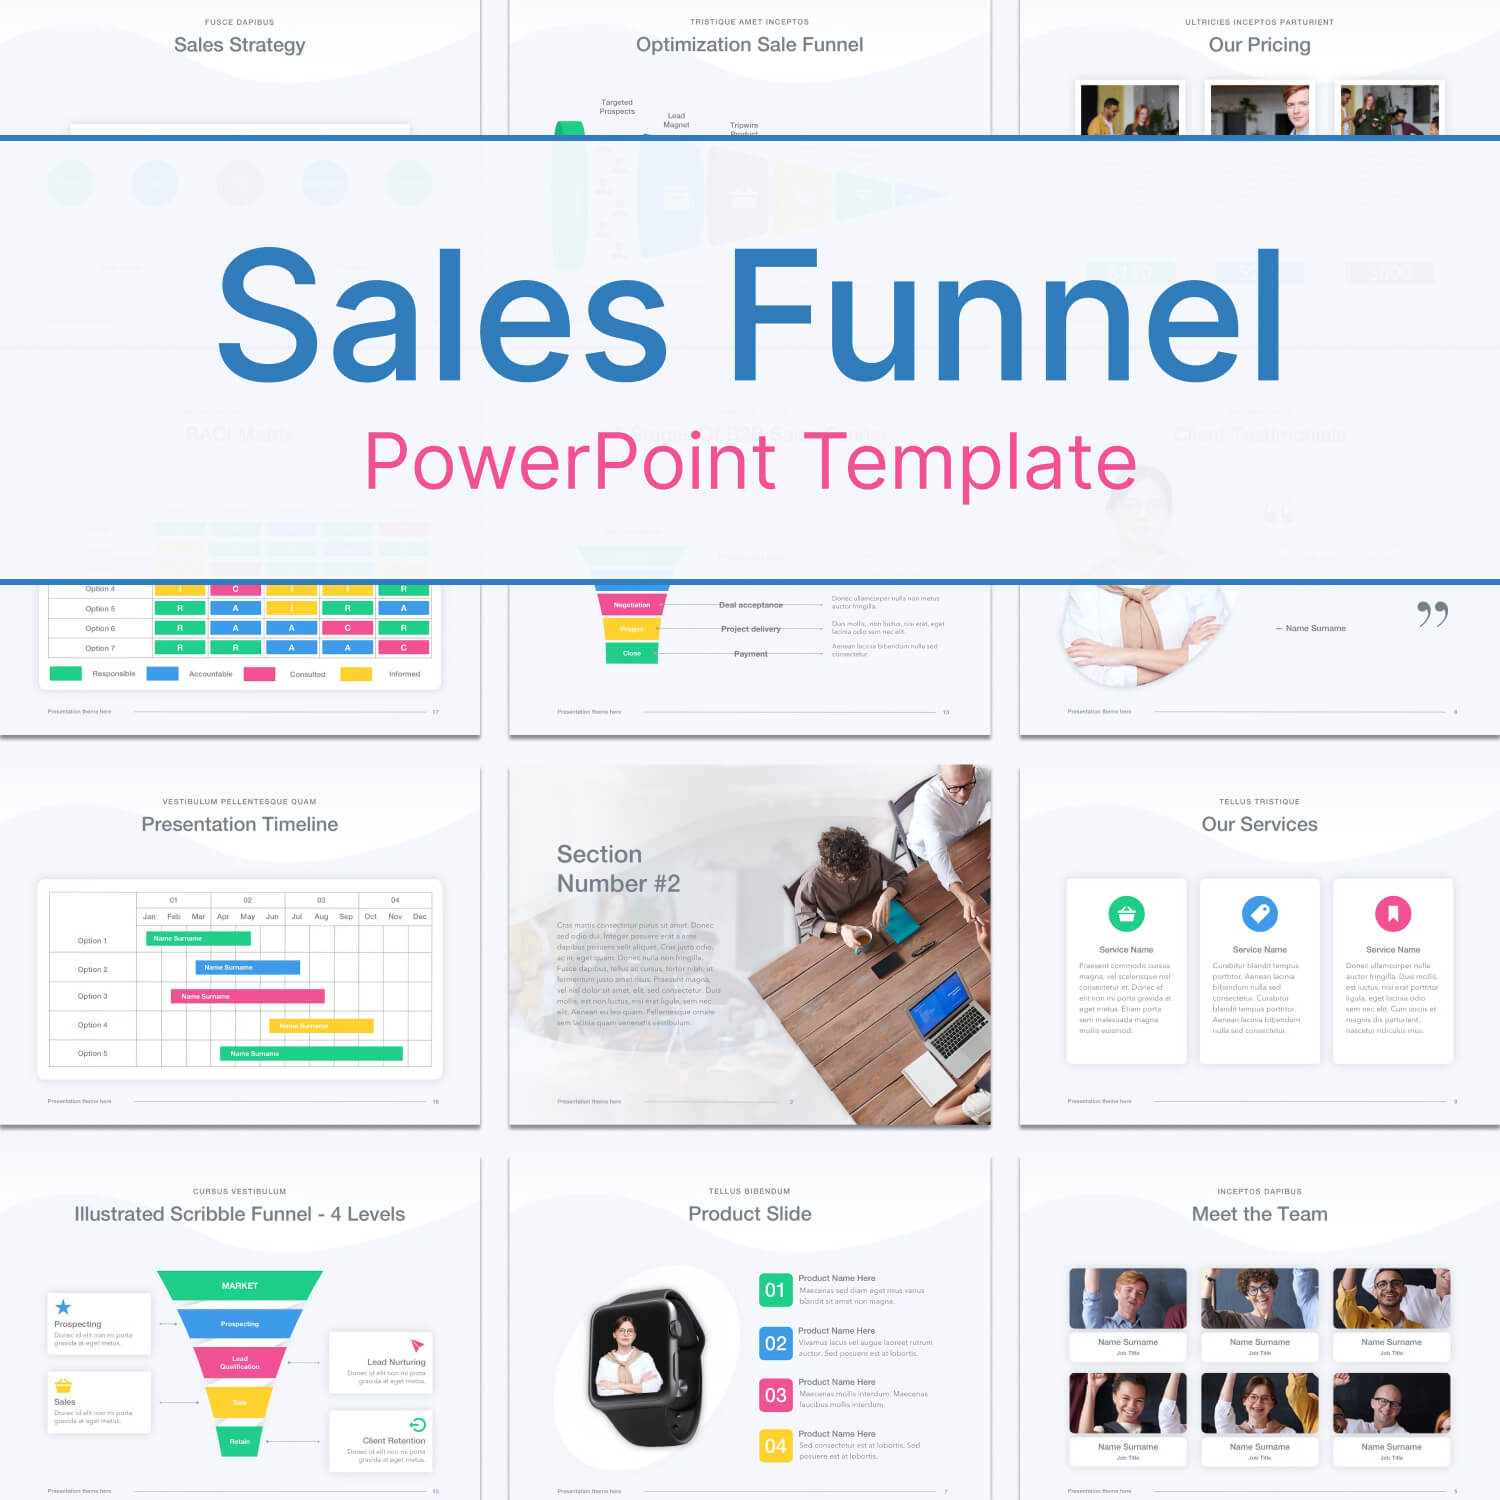 Sales Funnel PowerPoint Template.